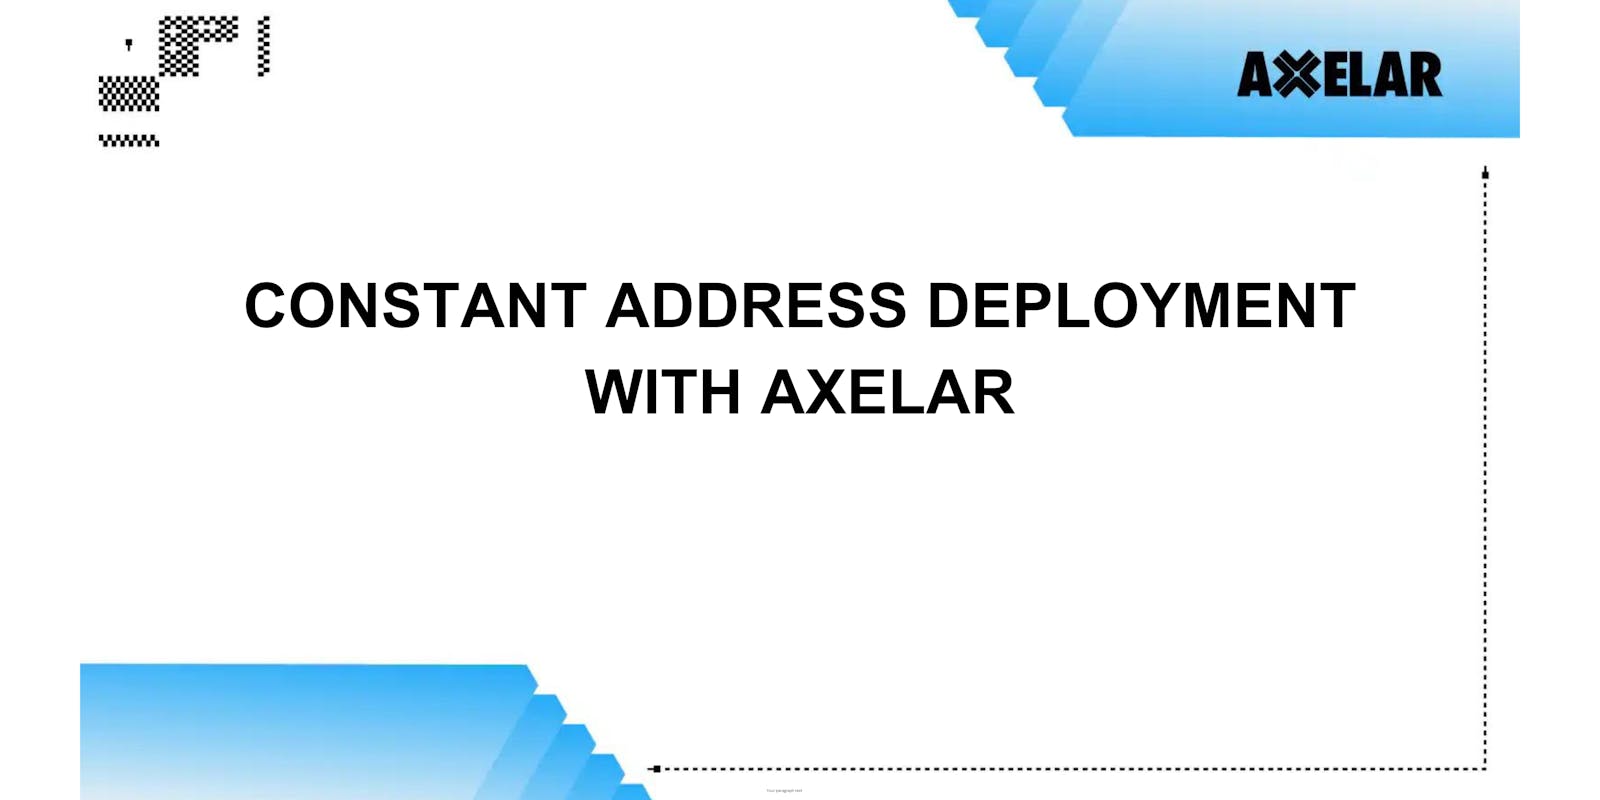 How to Deploy an Application With the Same Address Cross-Chain